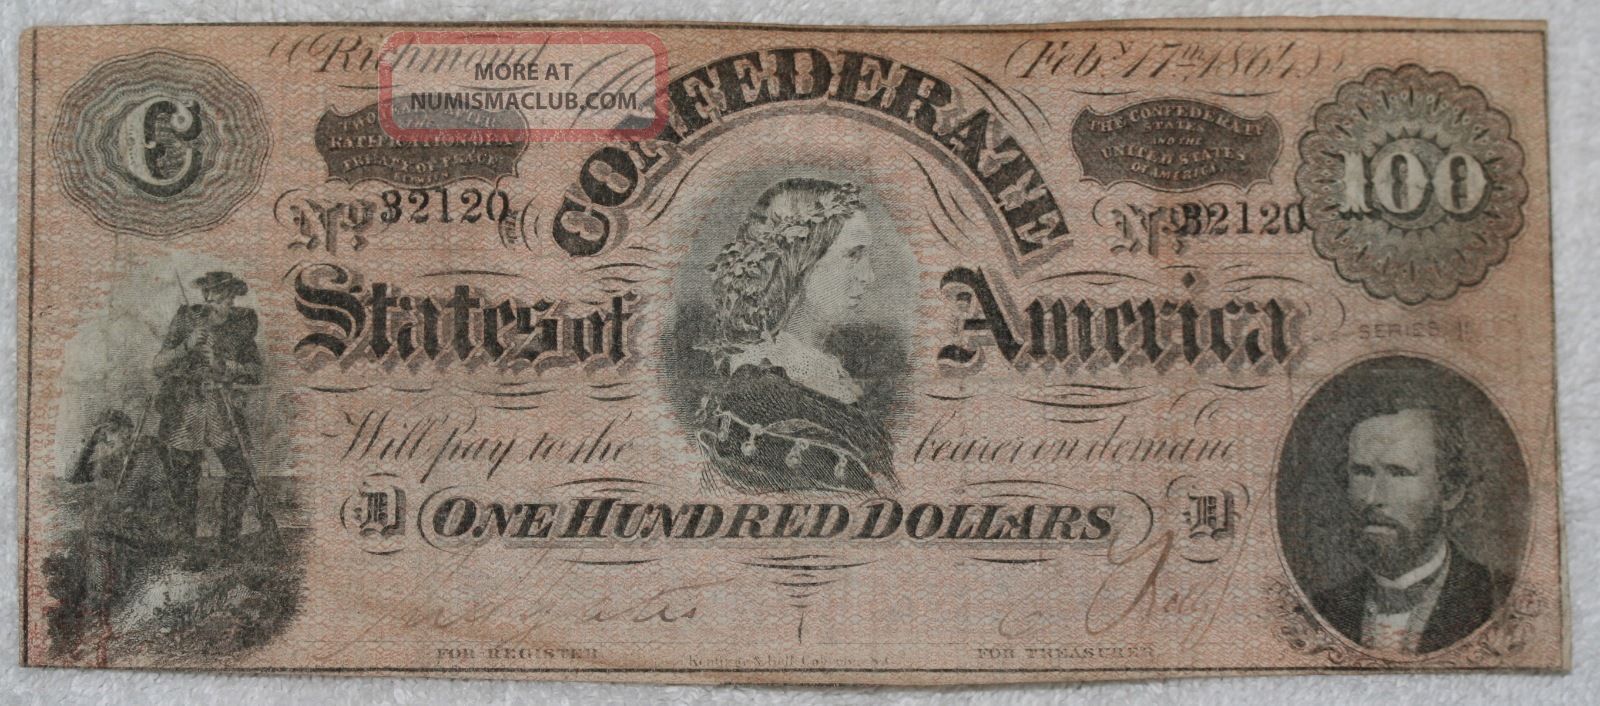 Confederate Currency $100 One Hundred Dollar Denomination February 17,  1864 Paper Money: US photo